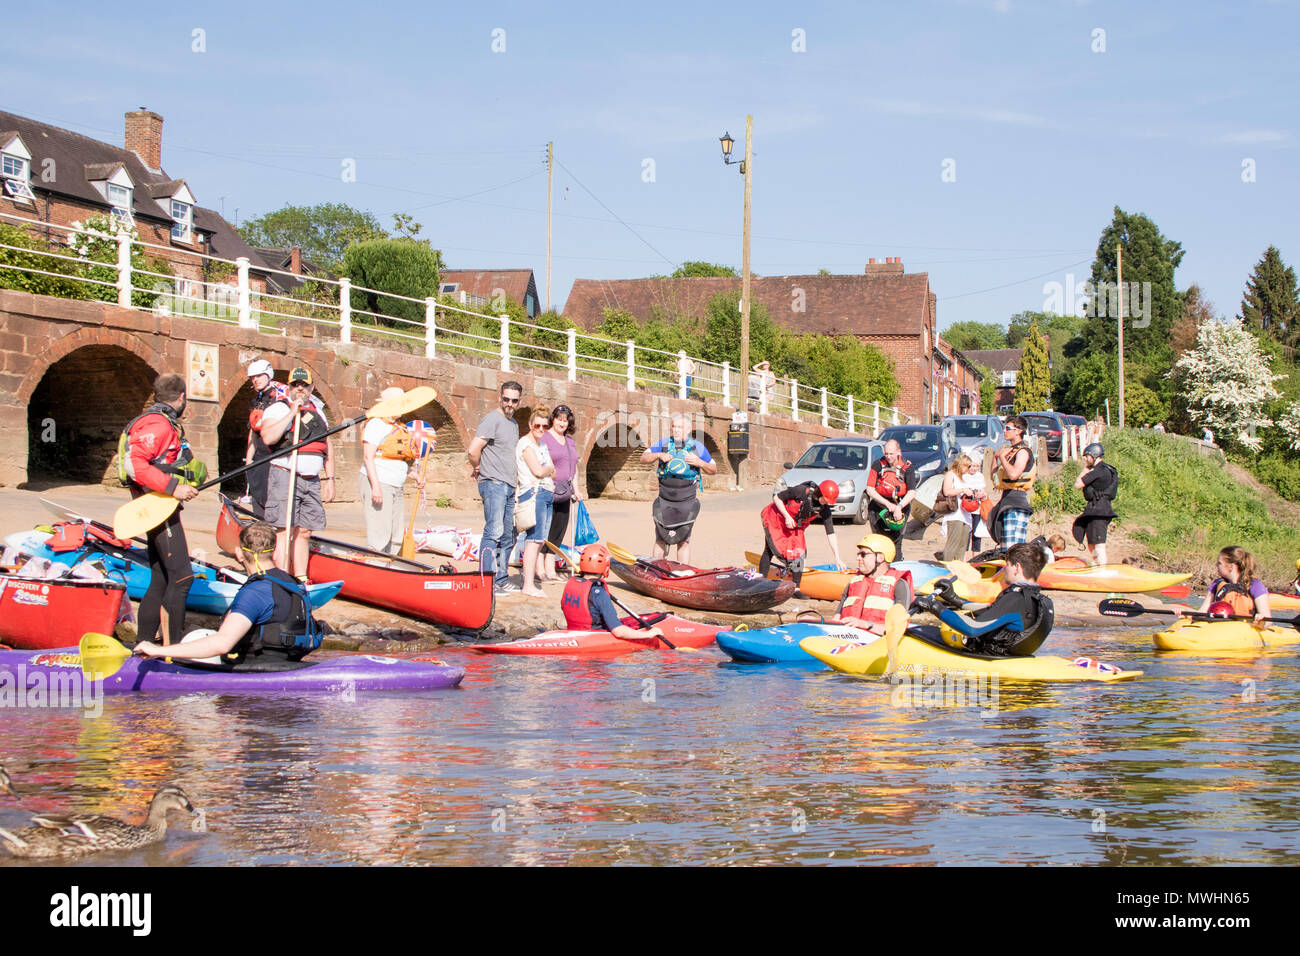 Canoeists and kayakers on the River Severn at Arley, Worcestershire, England, UK Stock Photo